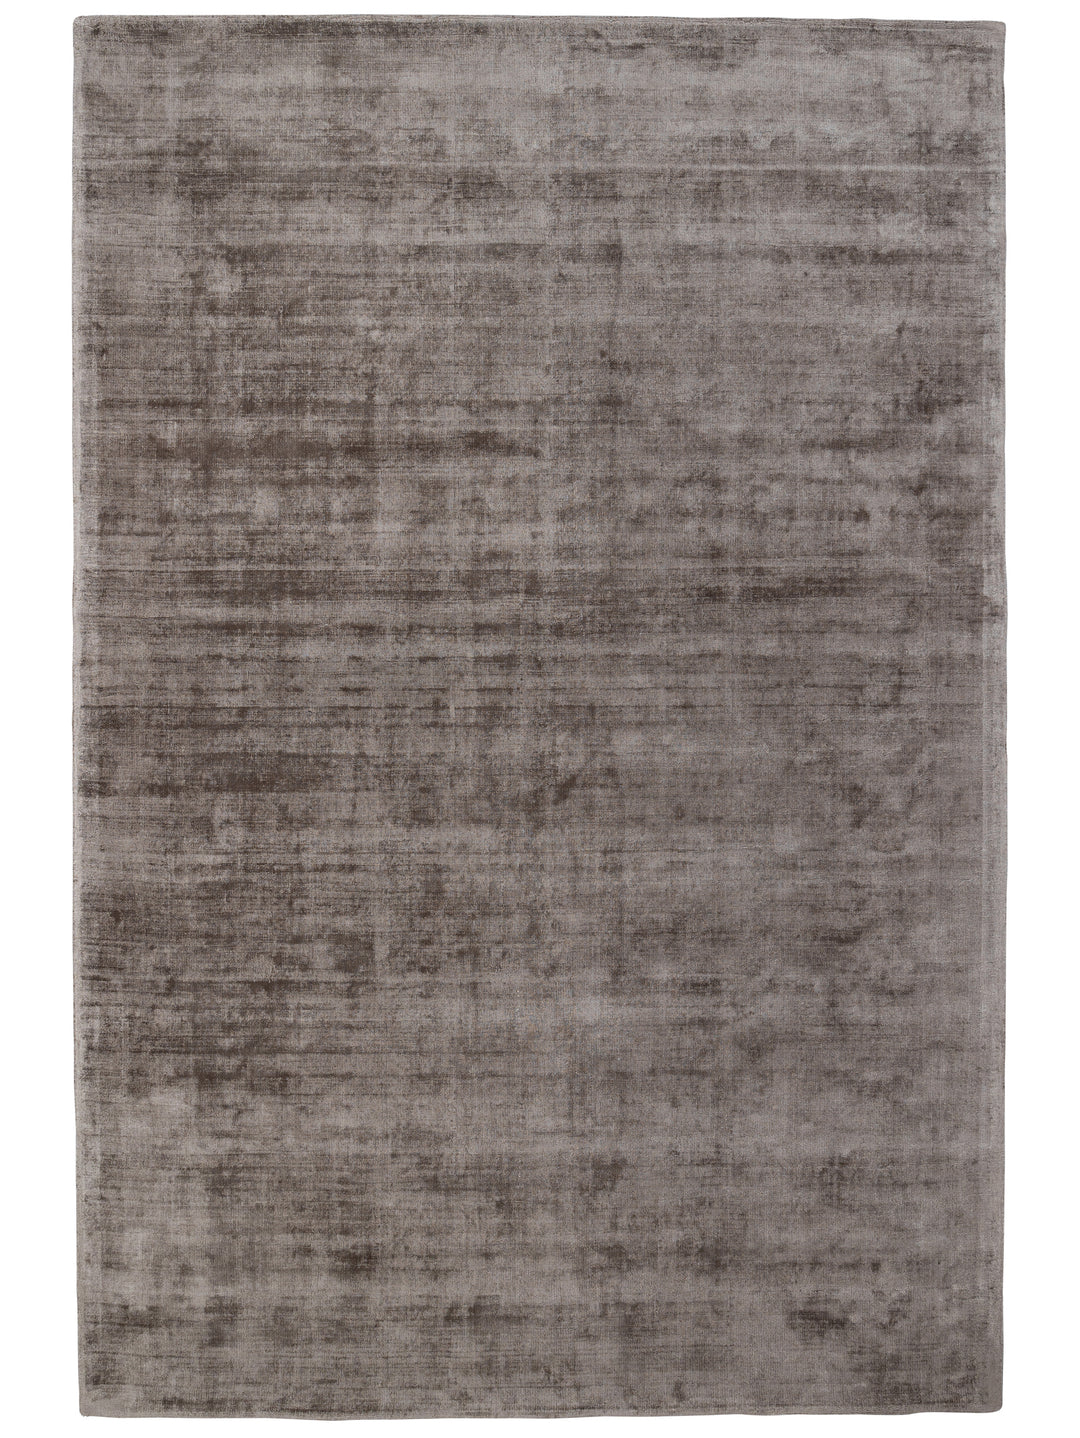 Sublime Rug in French Oak